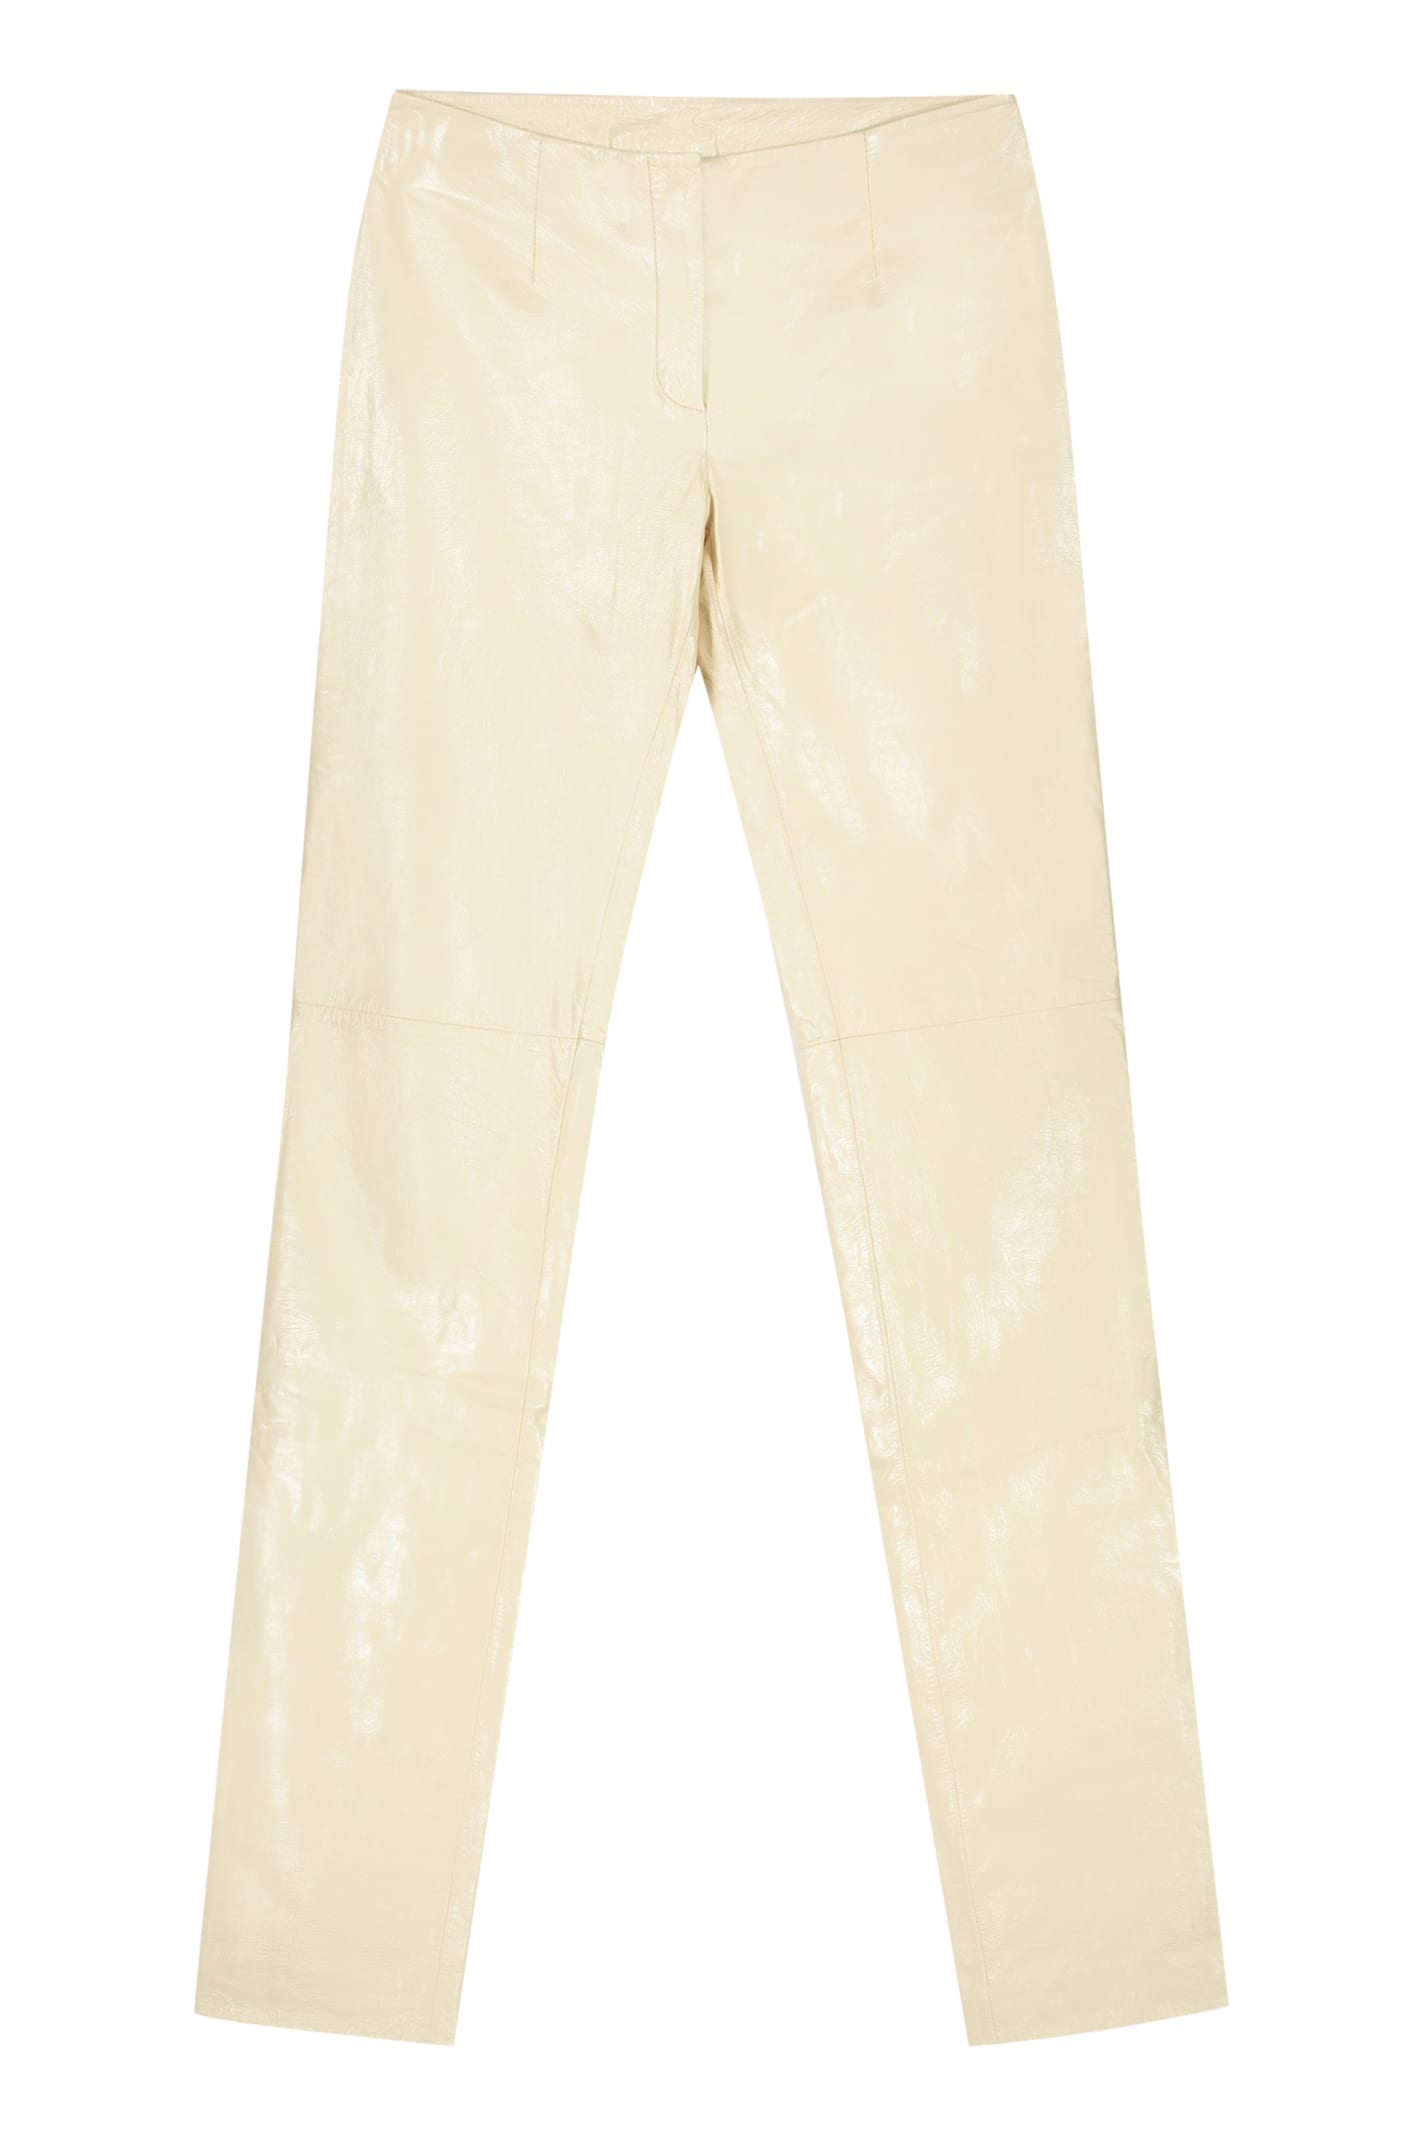 Missoni Leather Pants In Panna